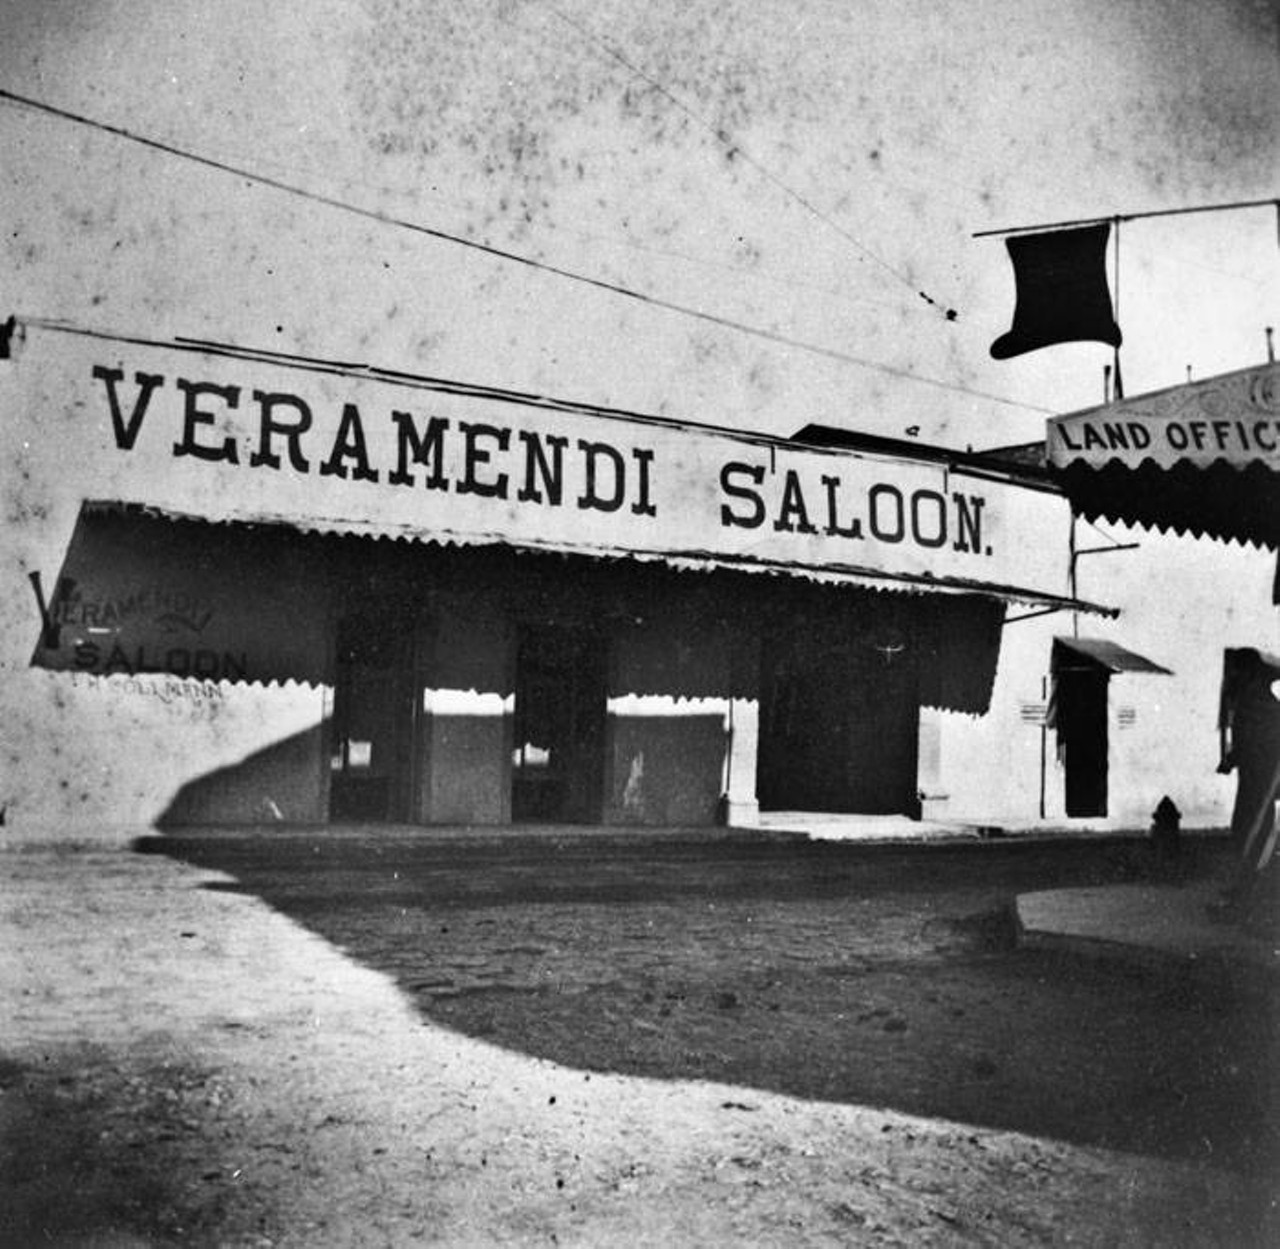 Veramendi Saloon, Soledad StreetThis photo from the late 1890s shows a San Antonio watering hole that started business with a far more elegant moniker: Veramendi Palace.